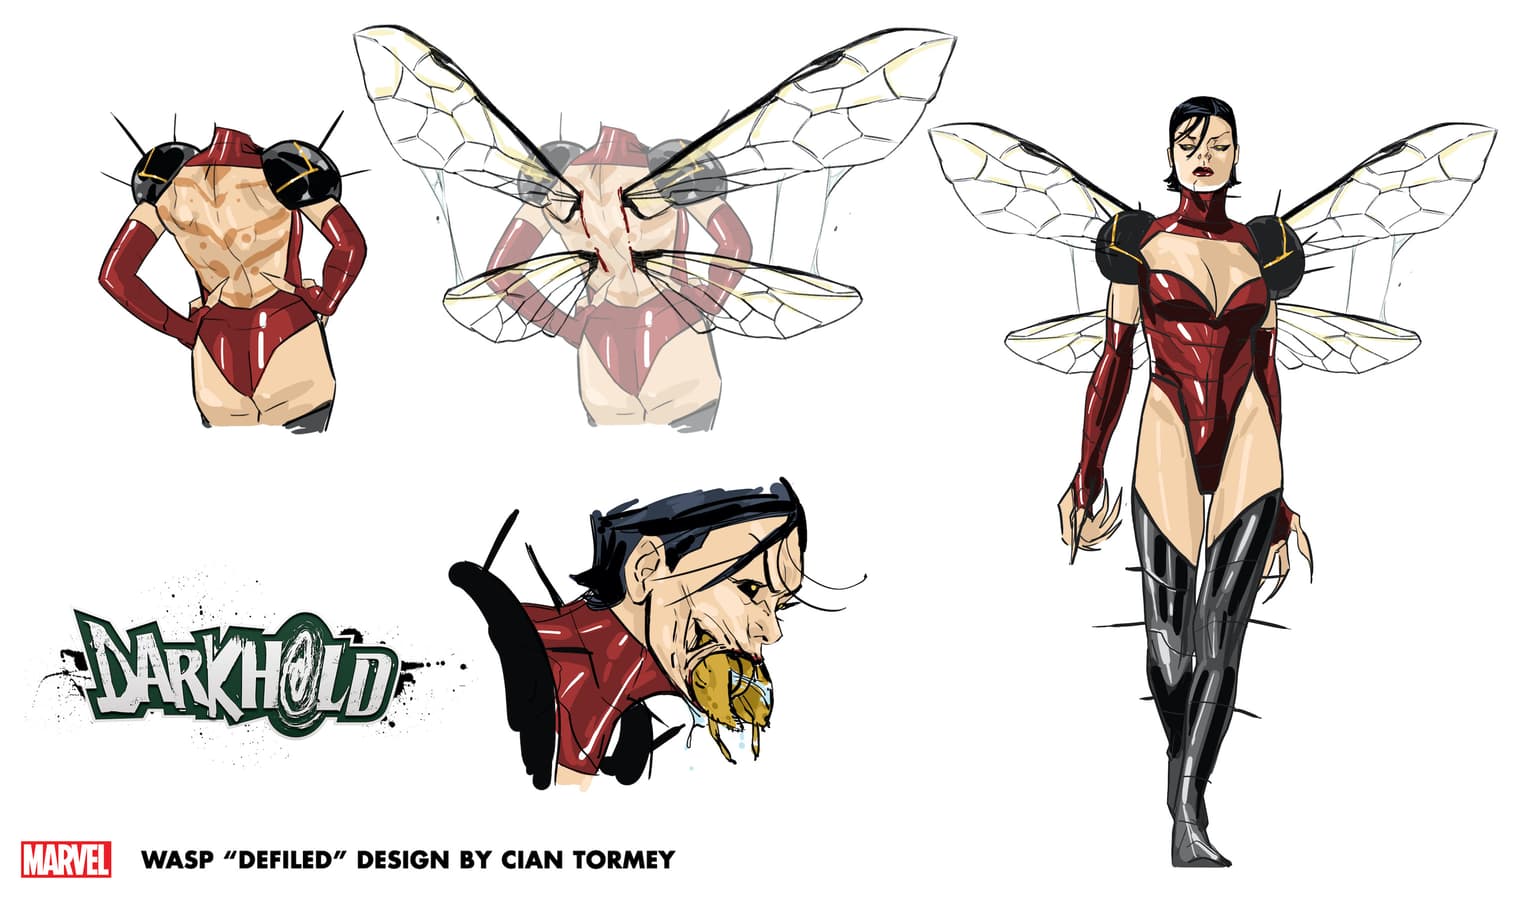 Wasp "Defiled" Design by Cian Tormey